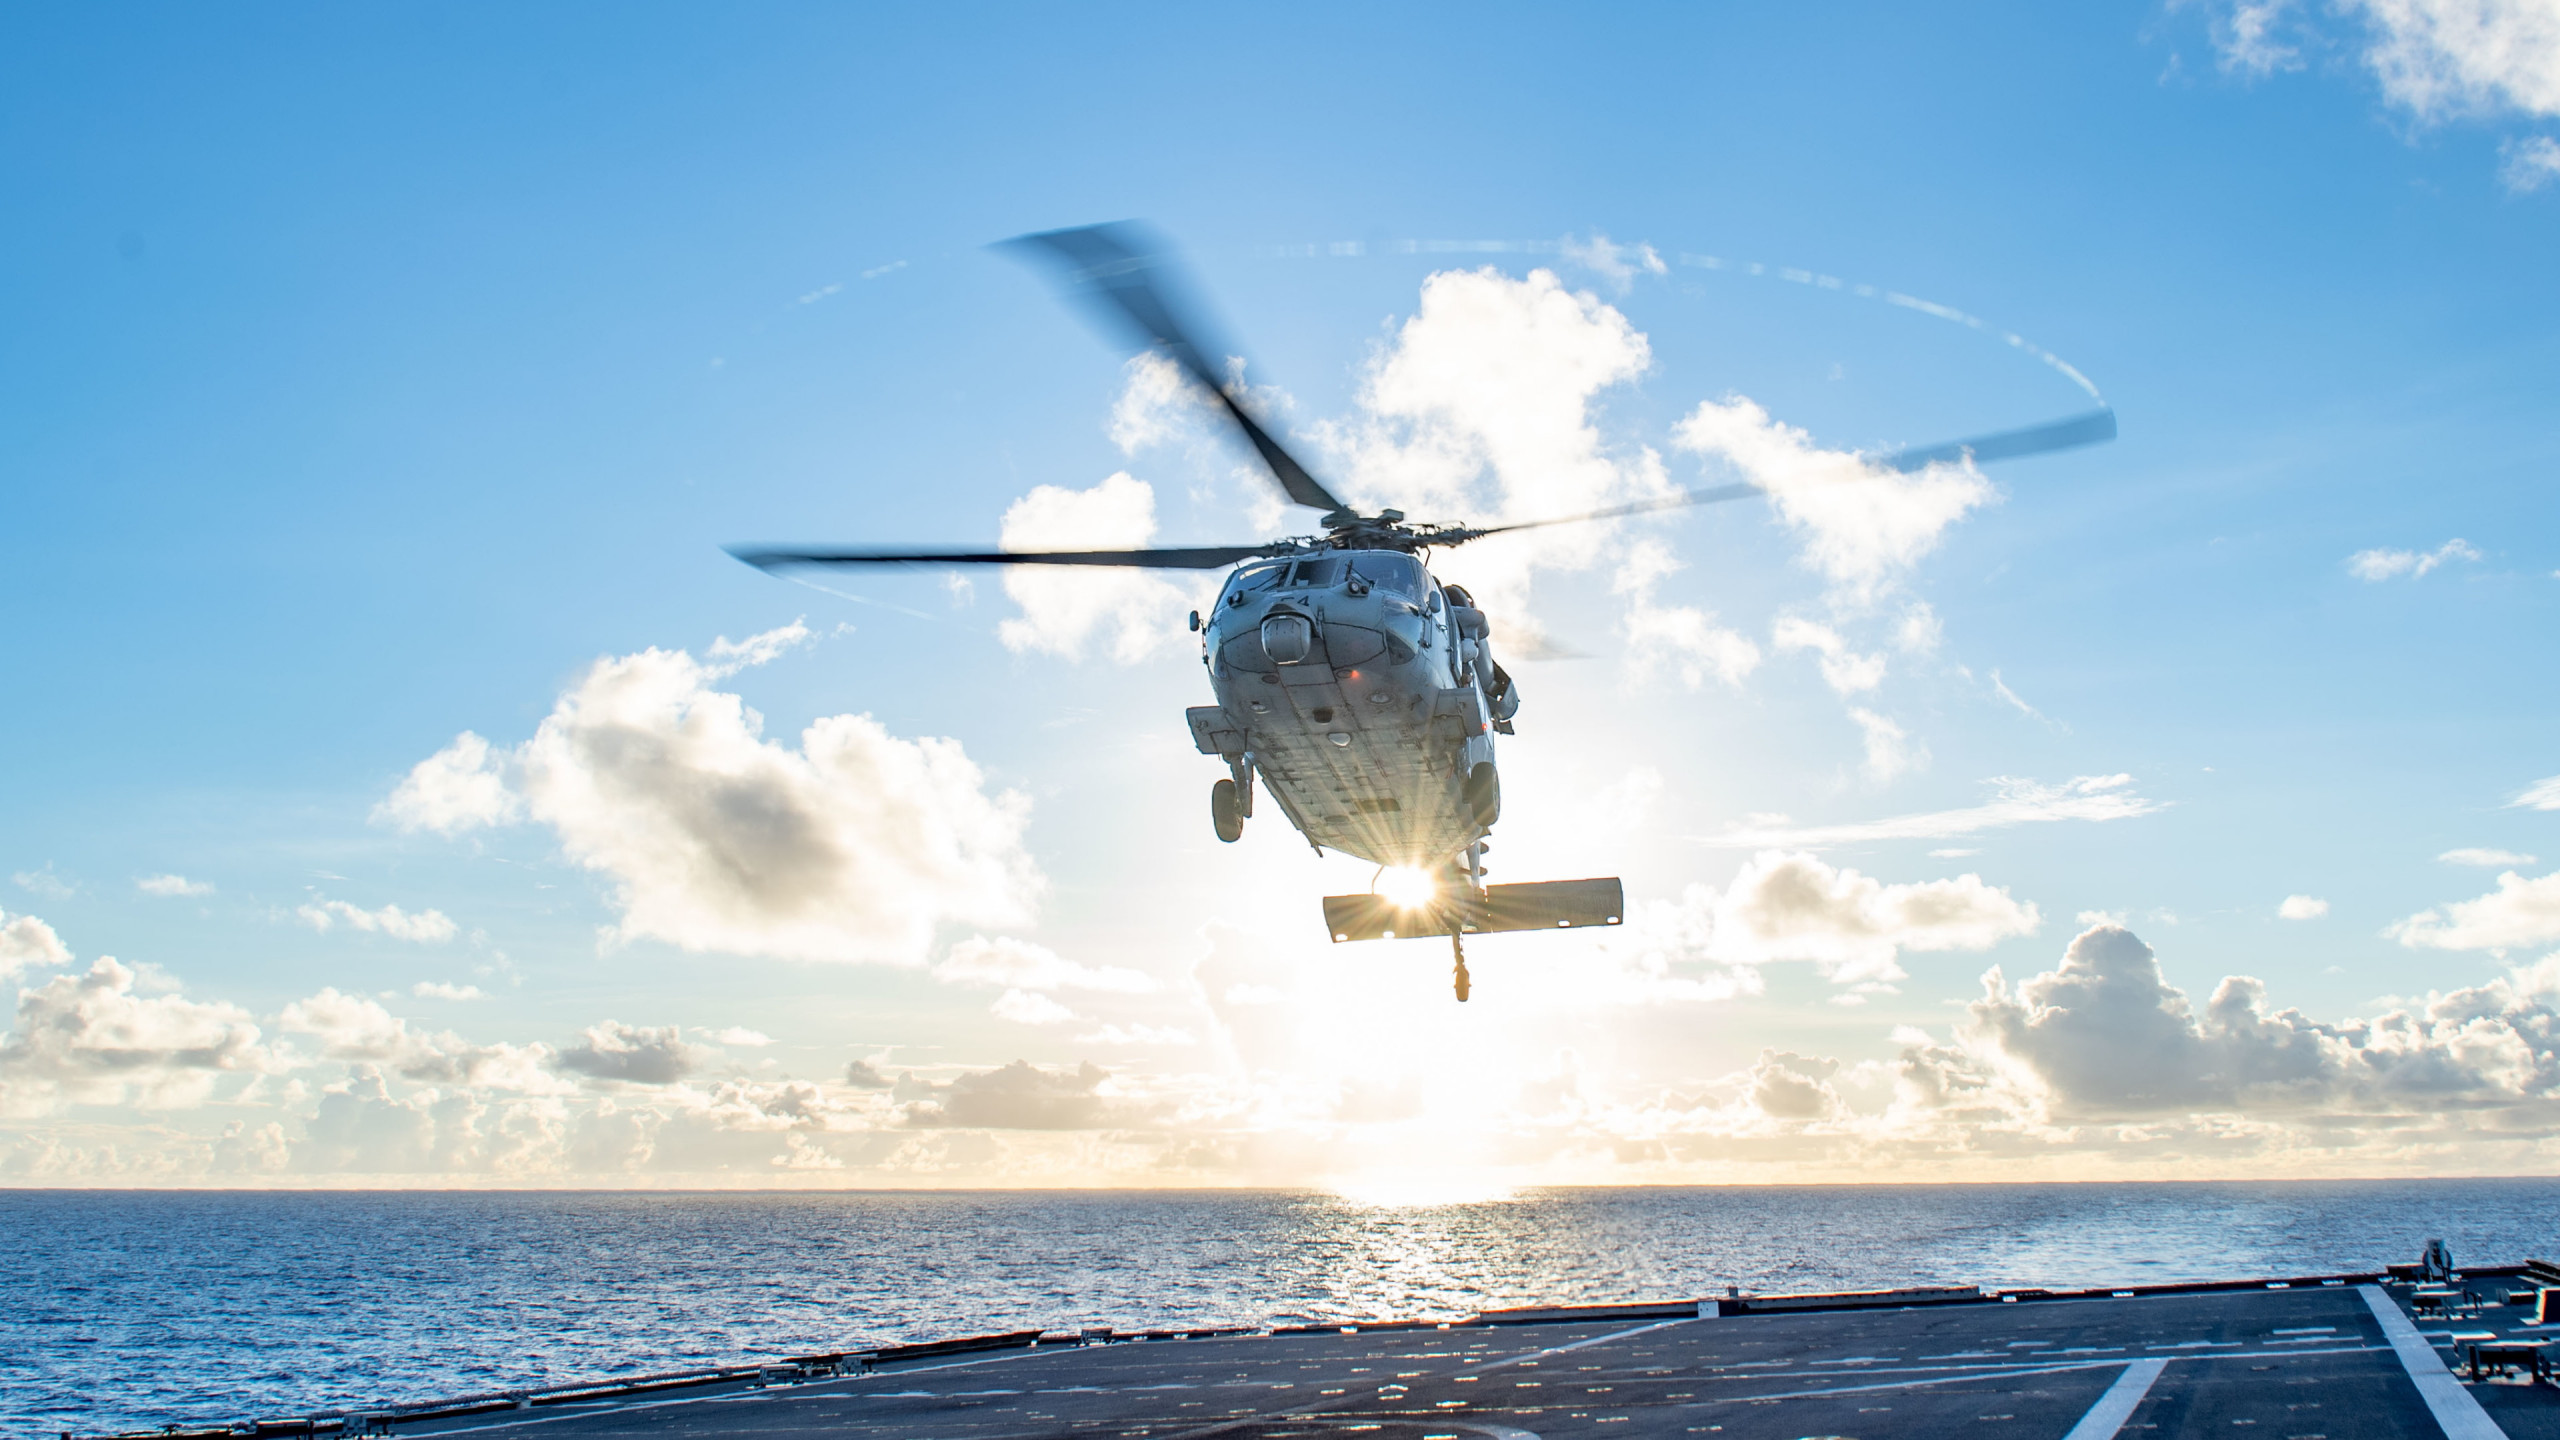 Seahawk Helicopter wallpaper 2560x1440